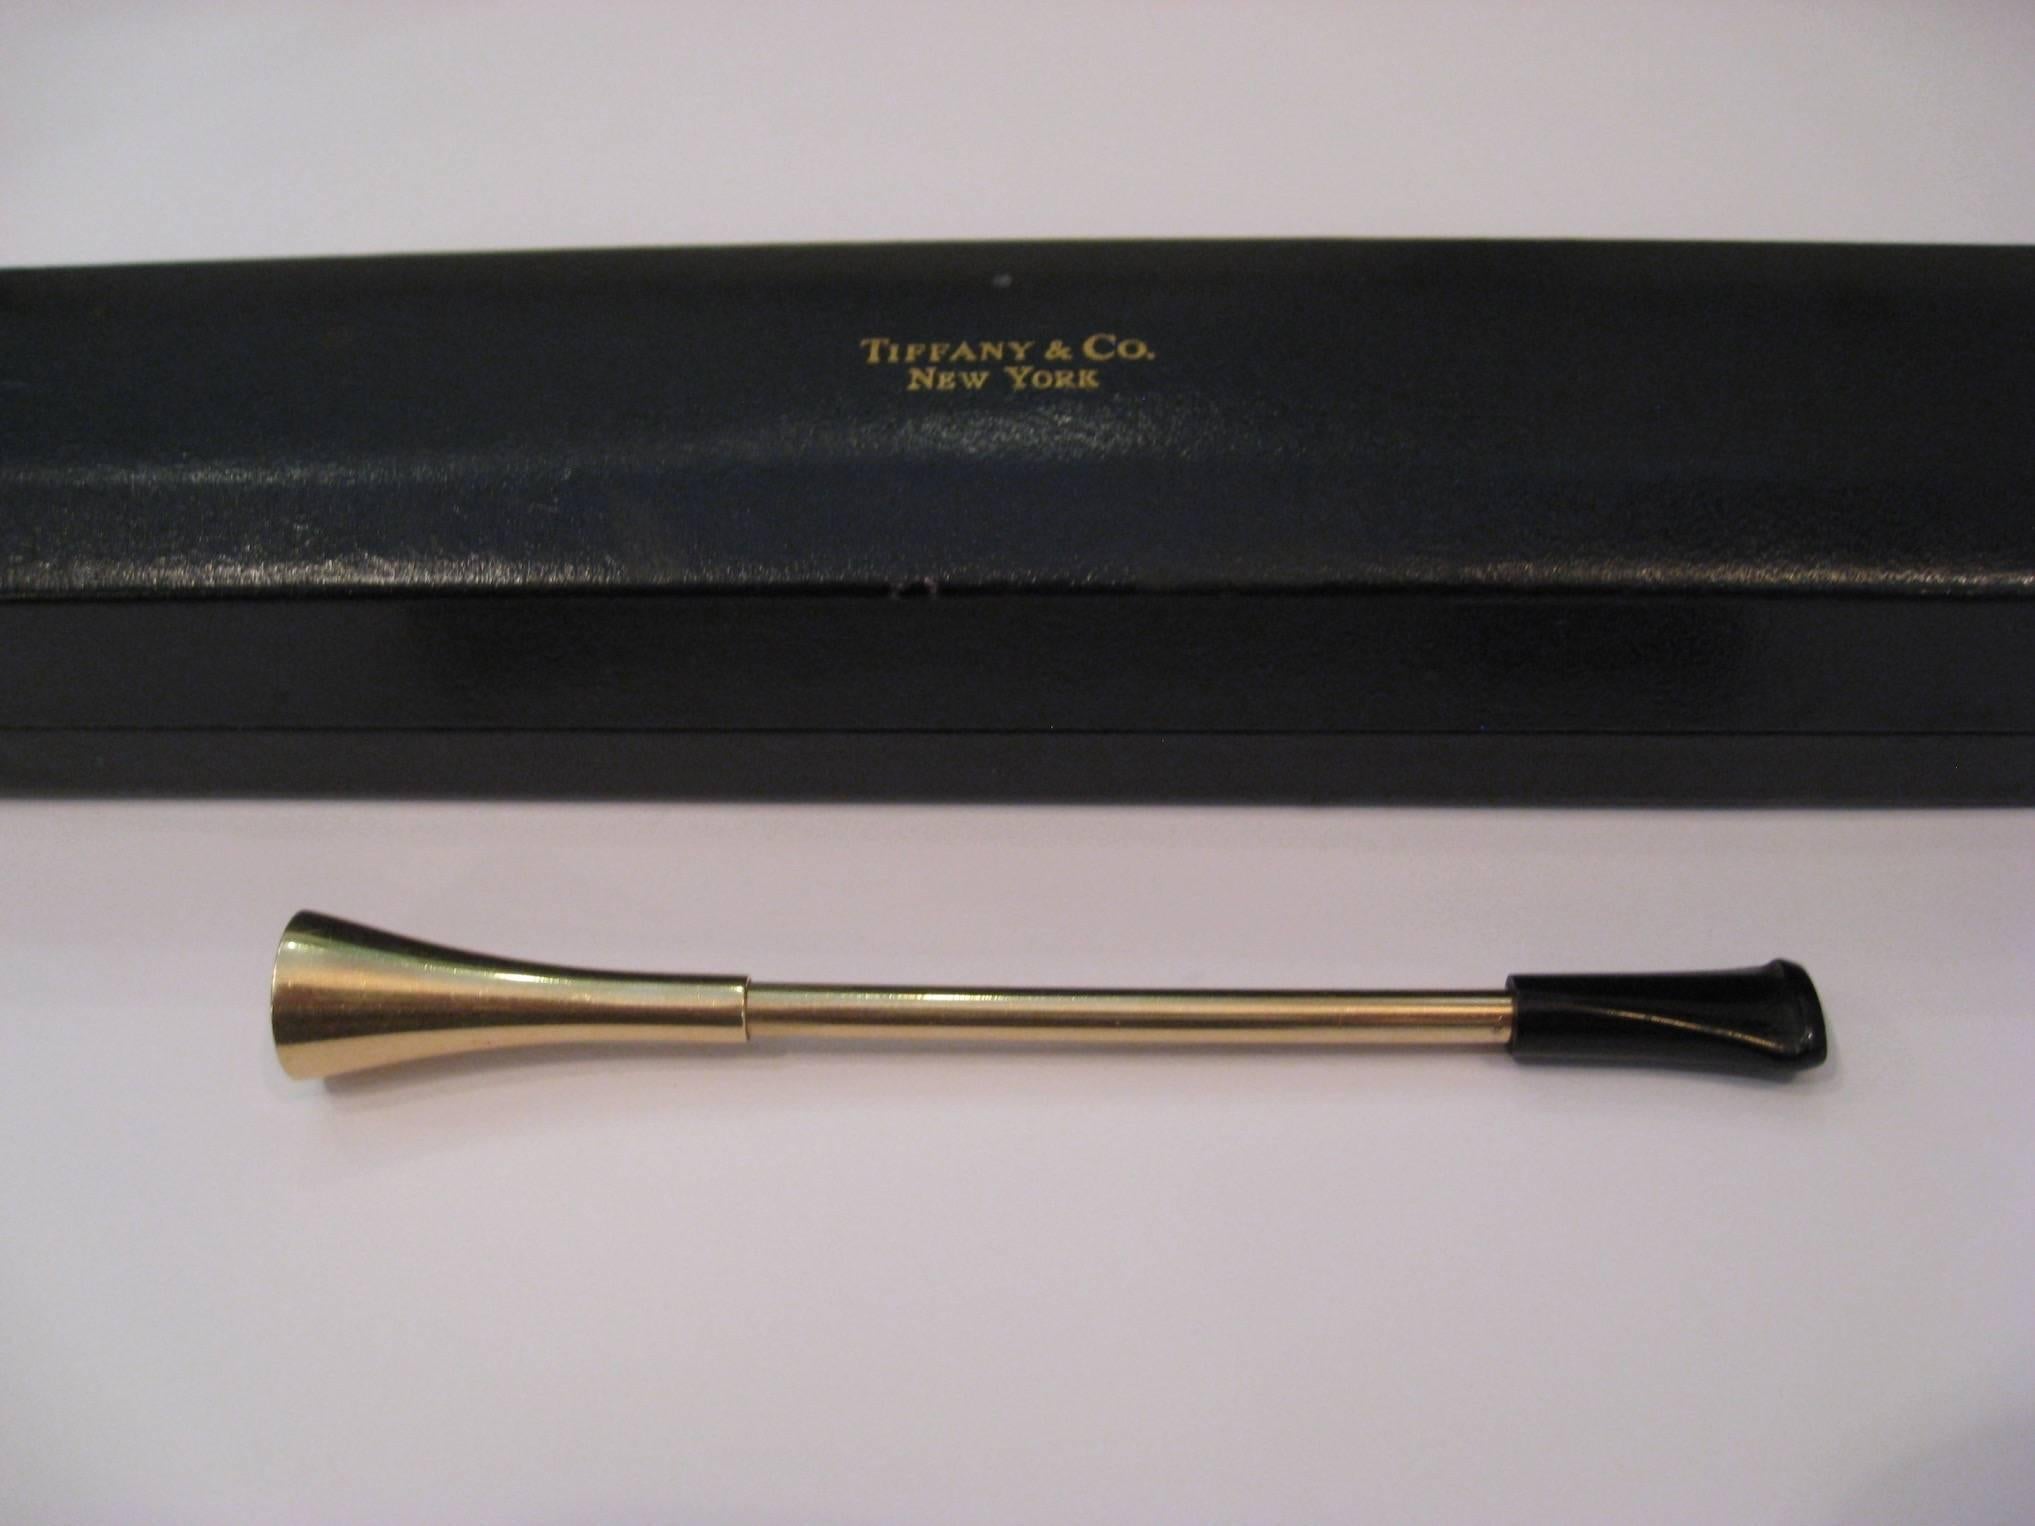 Mid-Century Tiffany & Co 14-karat gold cigarette holder with bakelite tip. Excellent condition with normal wear and light surface scratches. This has a spring mechanism to eject the cigarette from the holder. Engraved with Tiffany & Co 14K